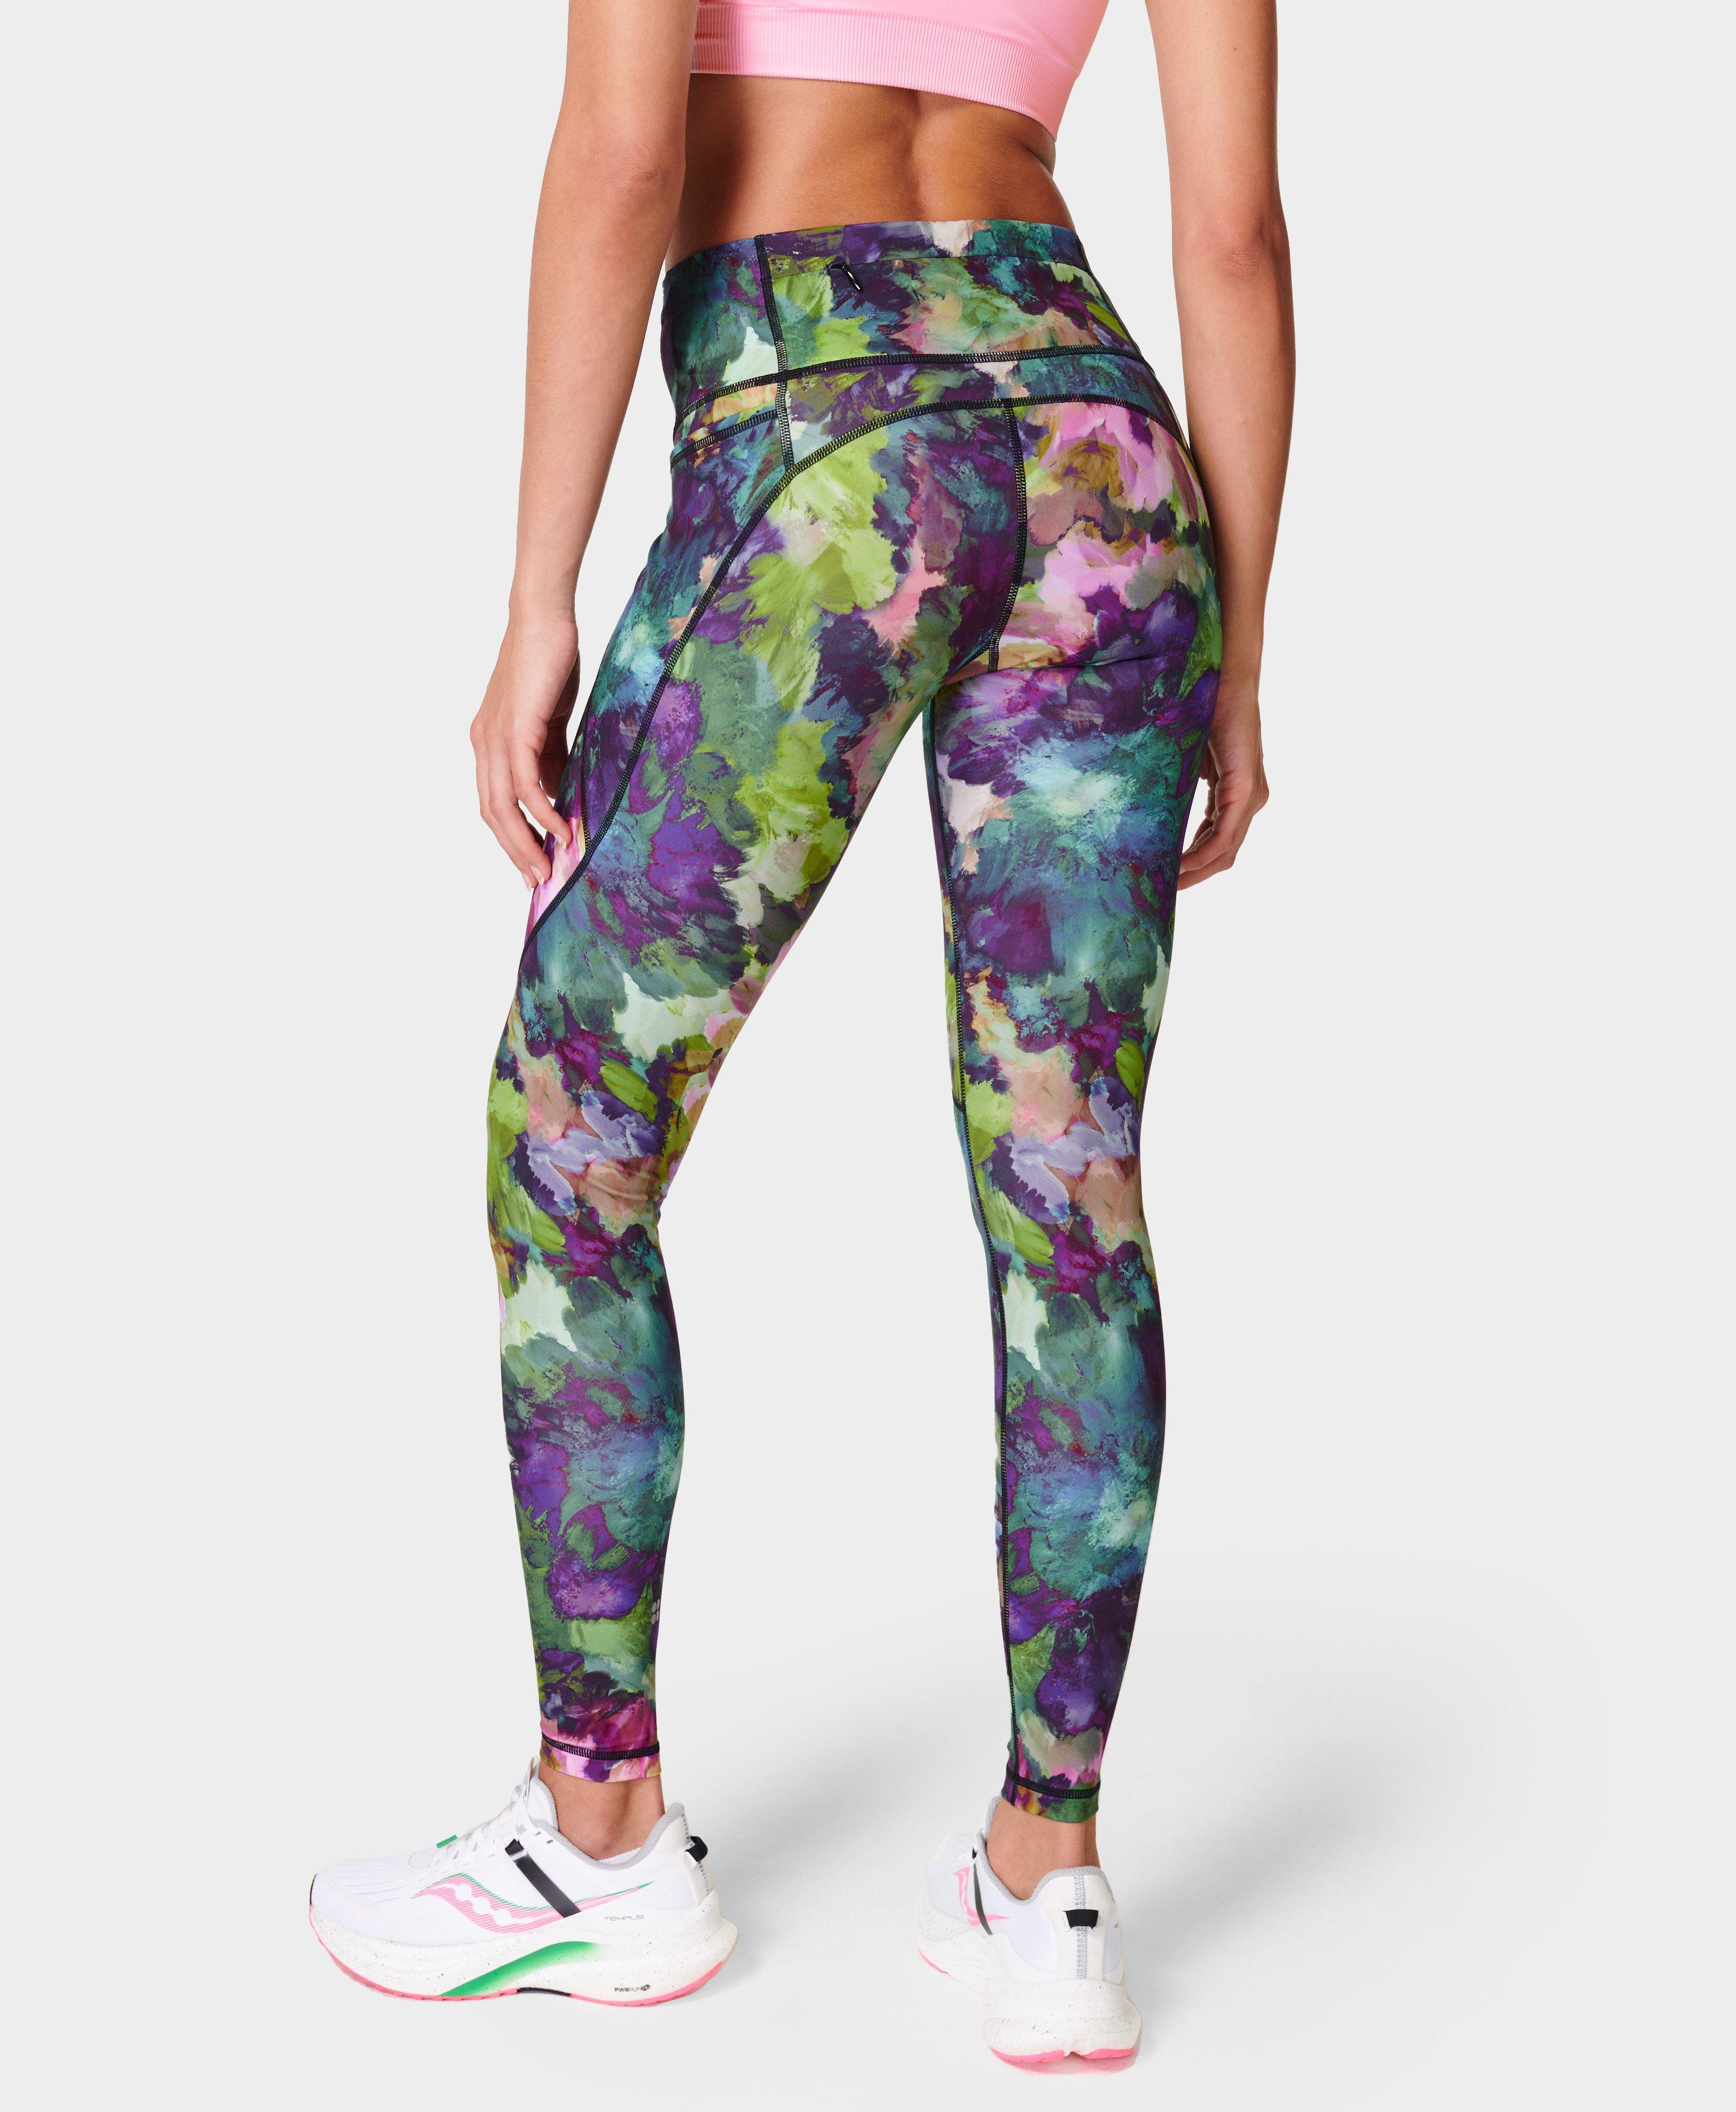 Women Workout Fitness Leggings Gym Green Printed Leggings Work Out